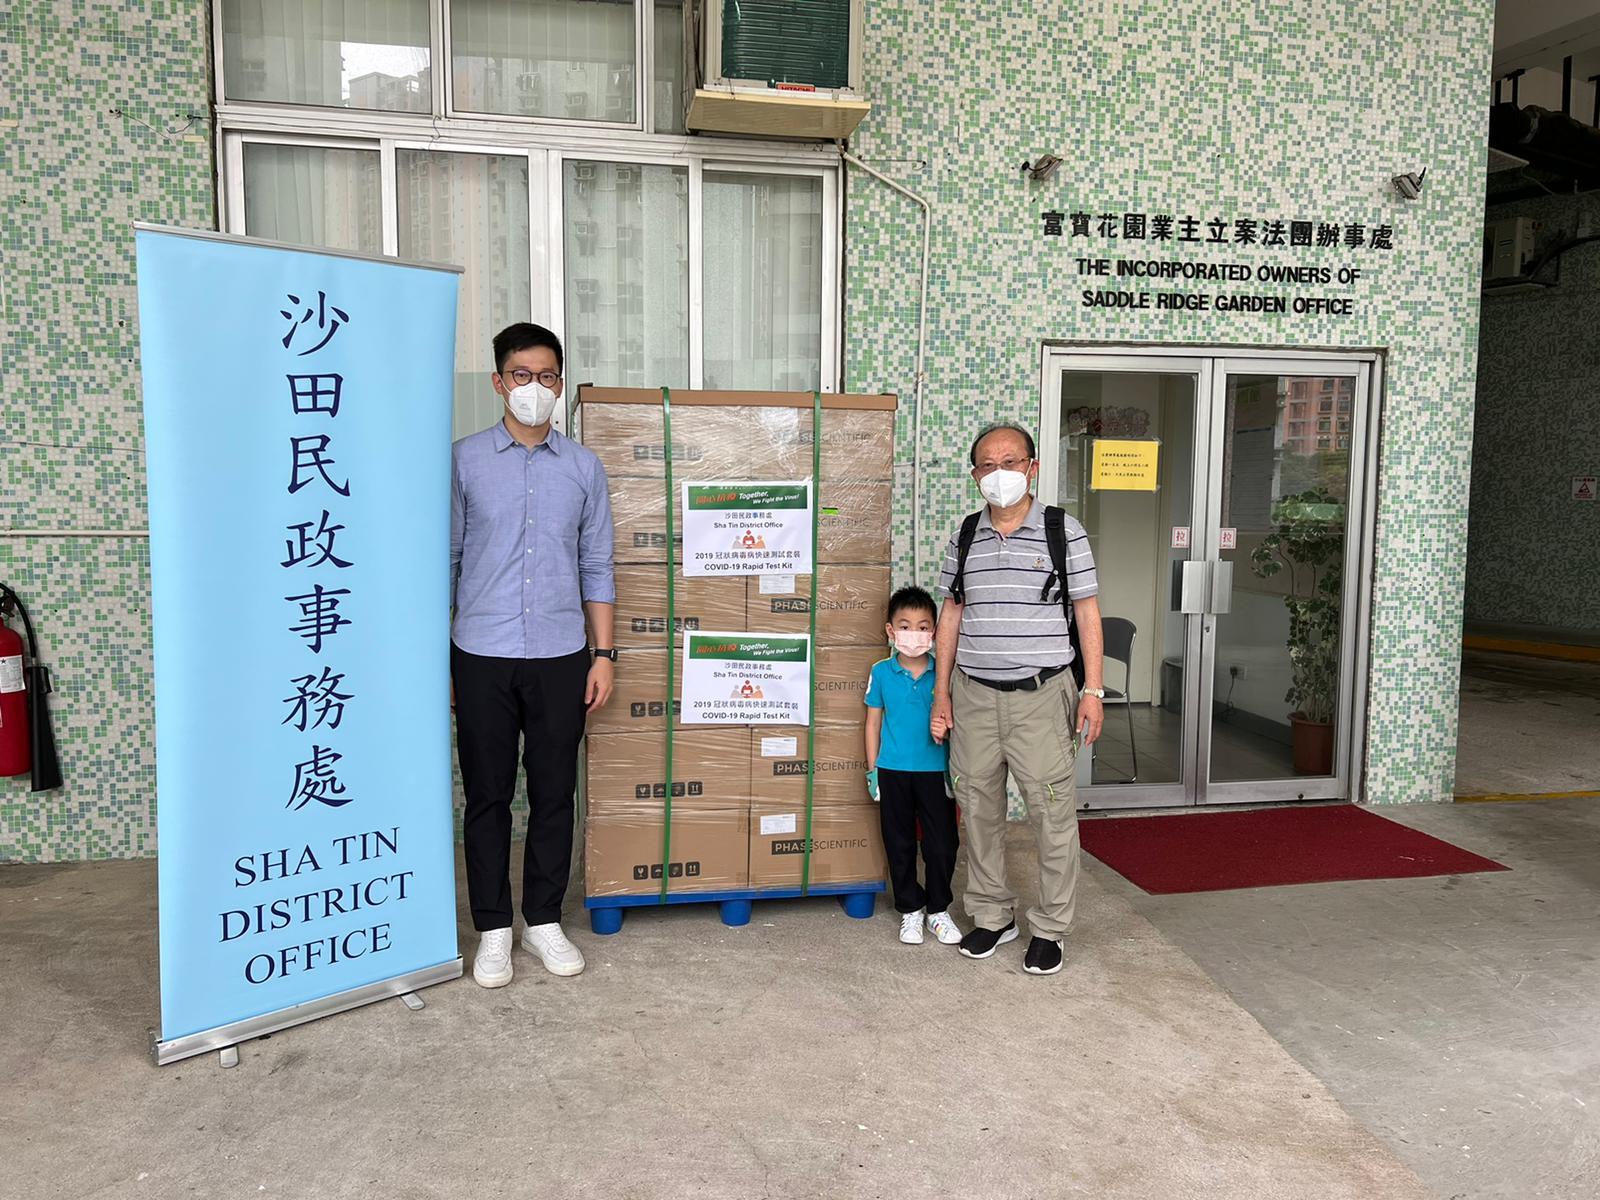 The Sha Tin District Office today (May 26) distributed COVID-19 rapid test kits to households, cleansing workers and property management staff living and working in Saddle Ridge Garden for voluntary testing through the property management company and the owners' corporation.